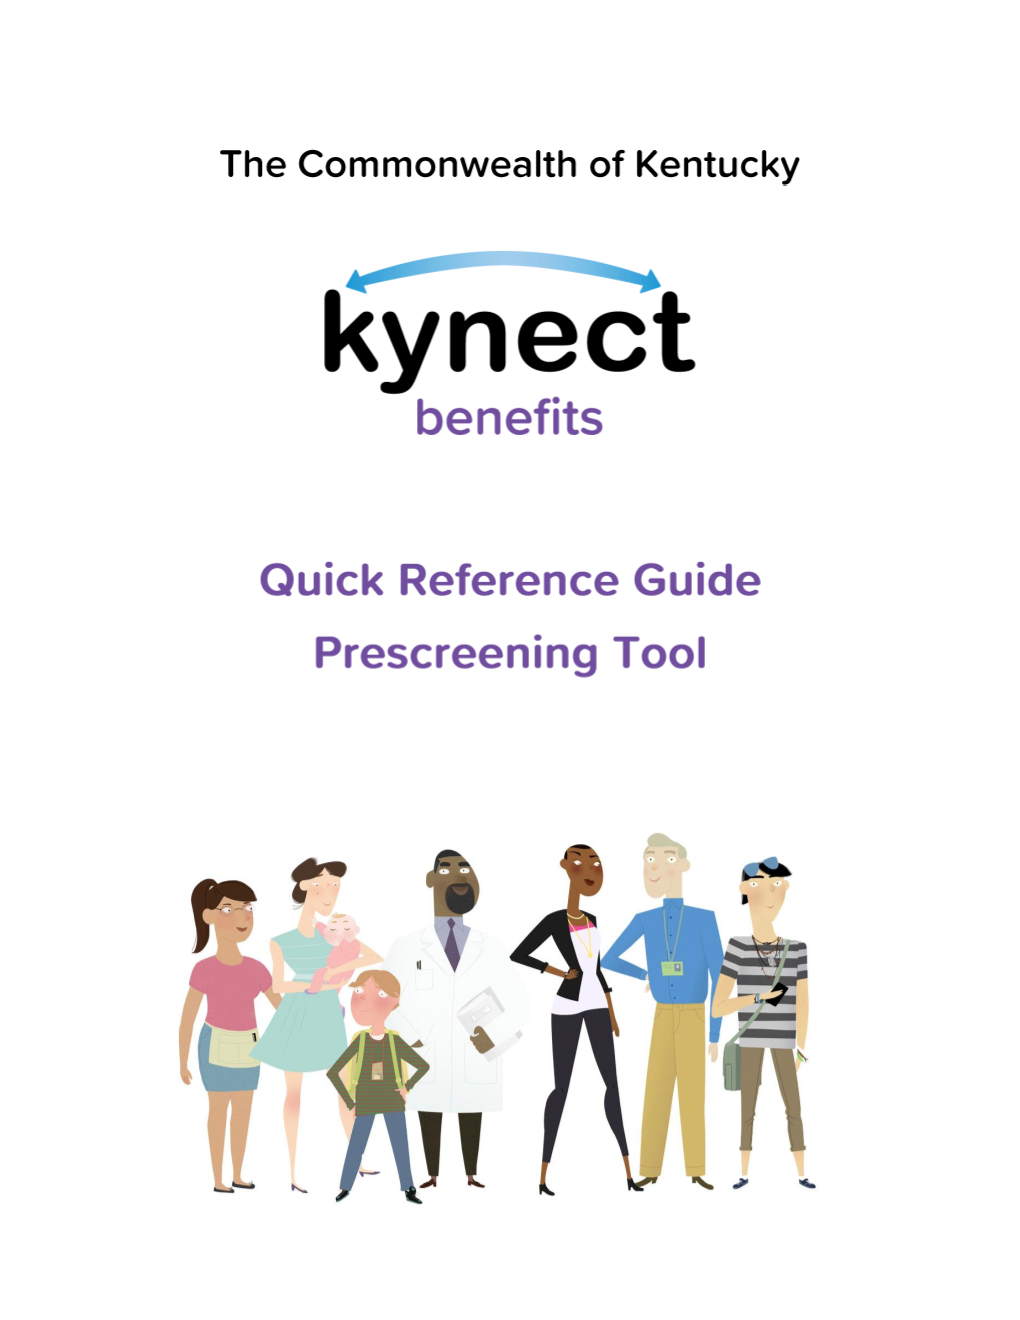 This Quick Reference Guide Is Designed to Help Users Complete the Steps Required to Use the Prescreening Tool in Kynect Benefits